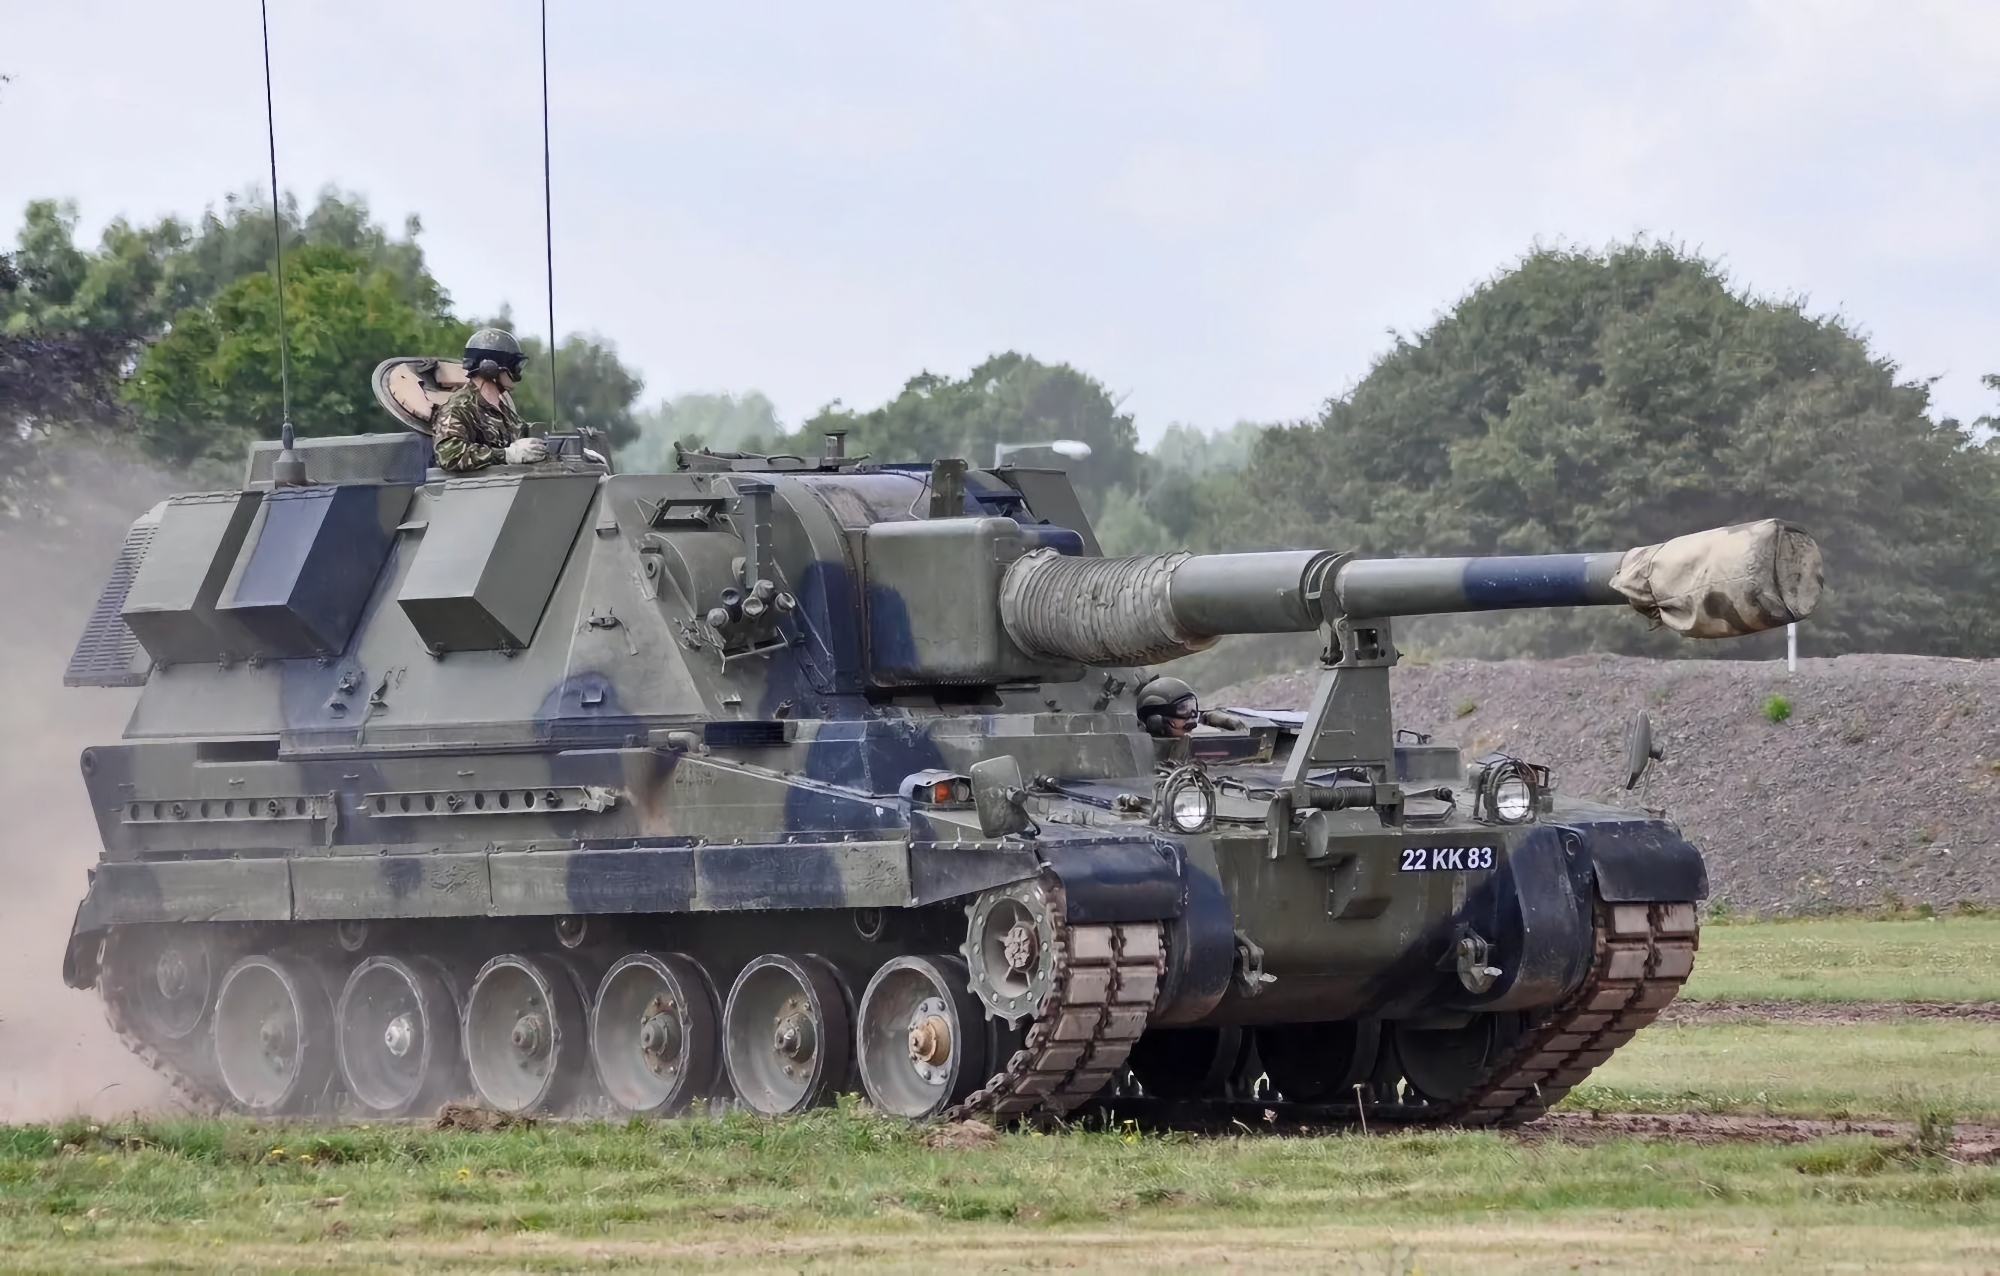 Not just more Challenger 2 tanks: the UK will also deliver more AS-90 SAUs to Ukraine than originally promised